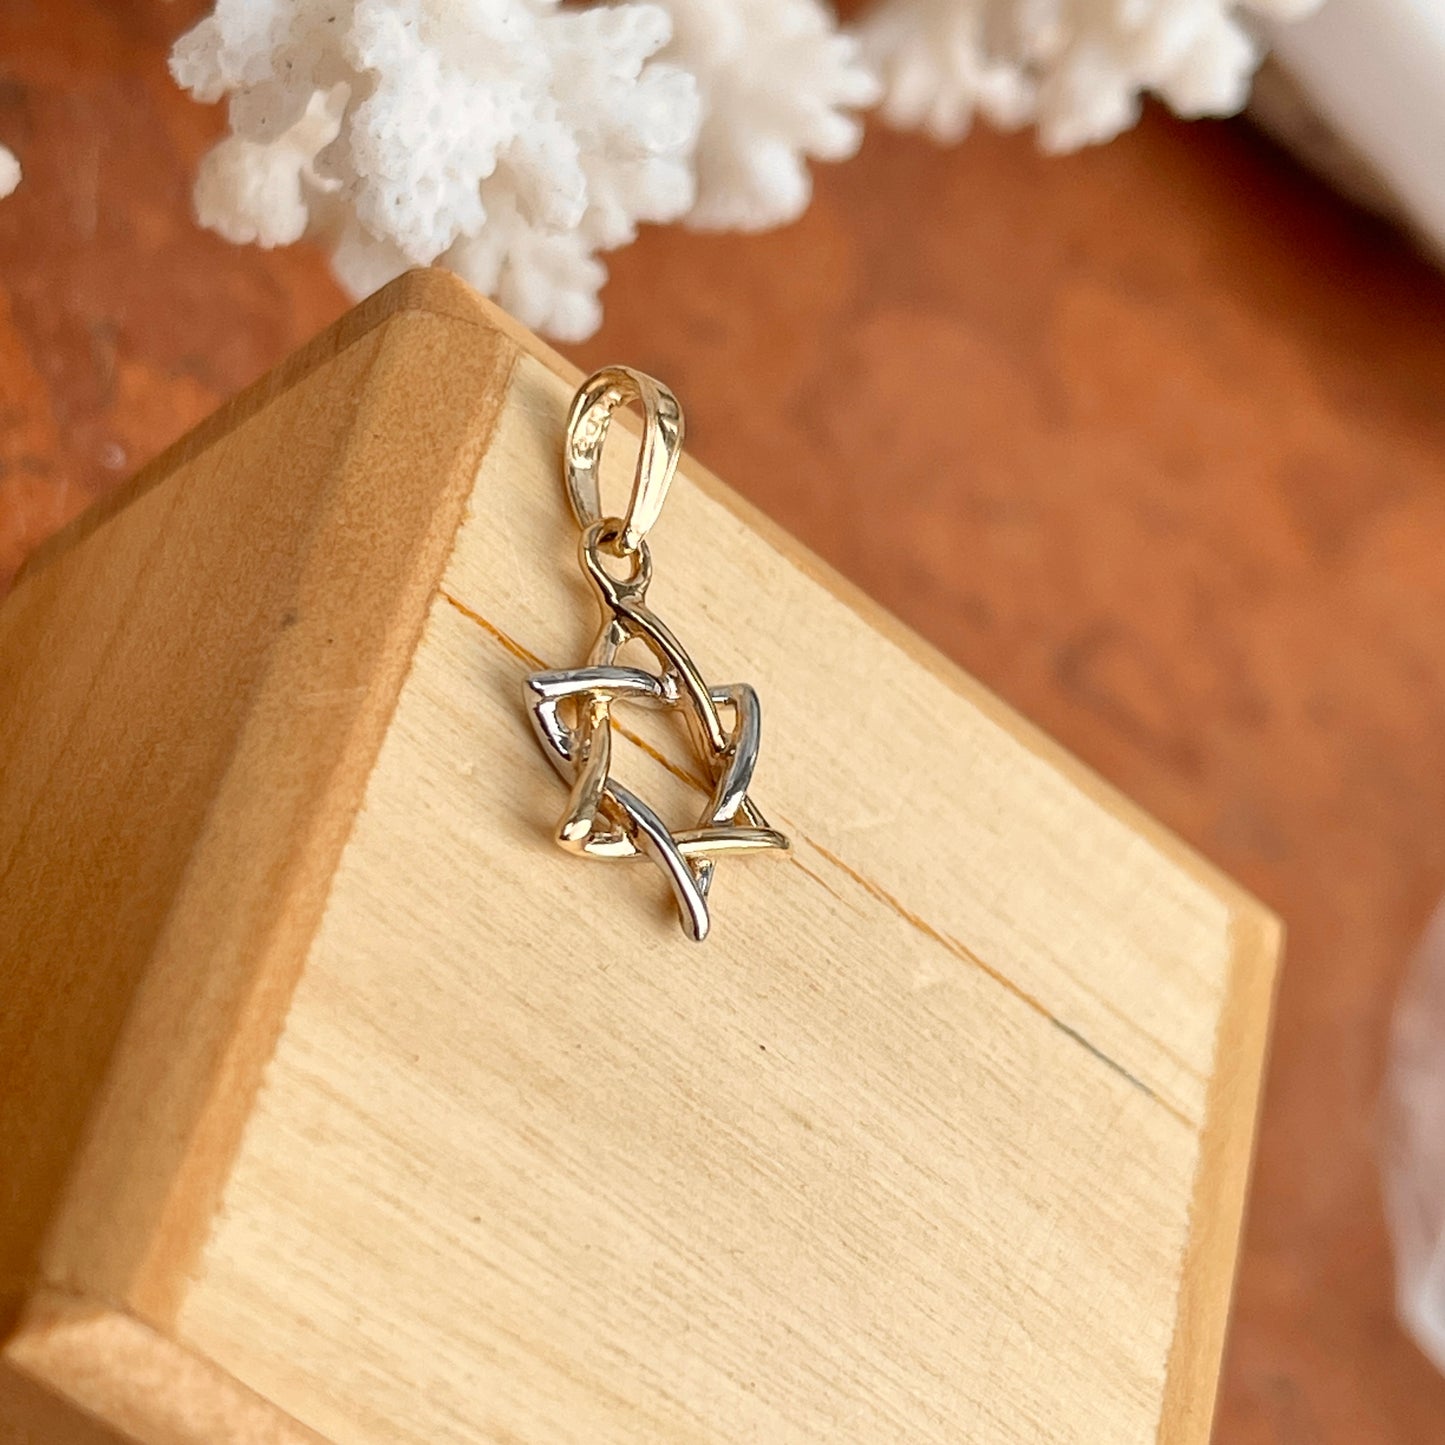 14KT White Gold + Yellow Gold Small Star of David Pendant